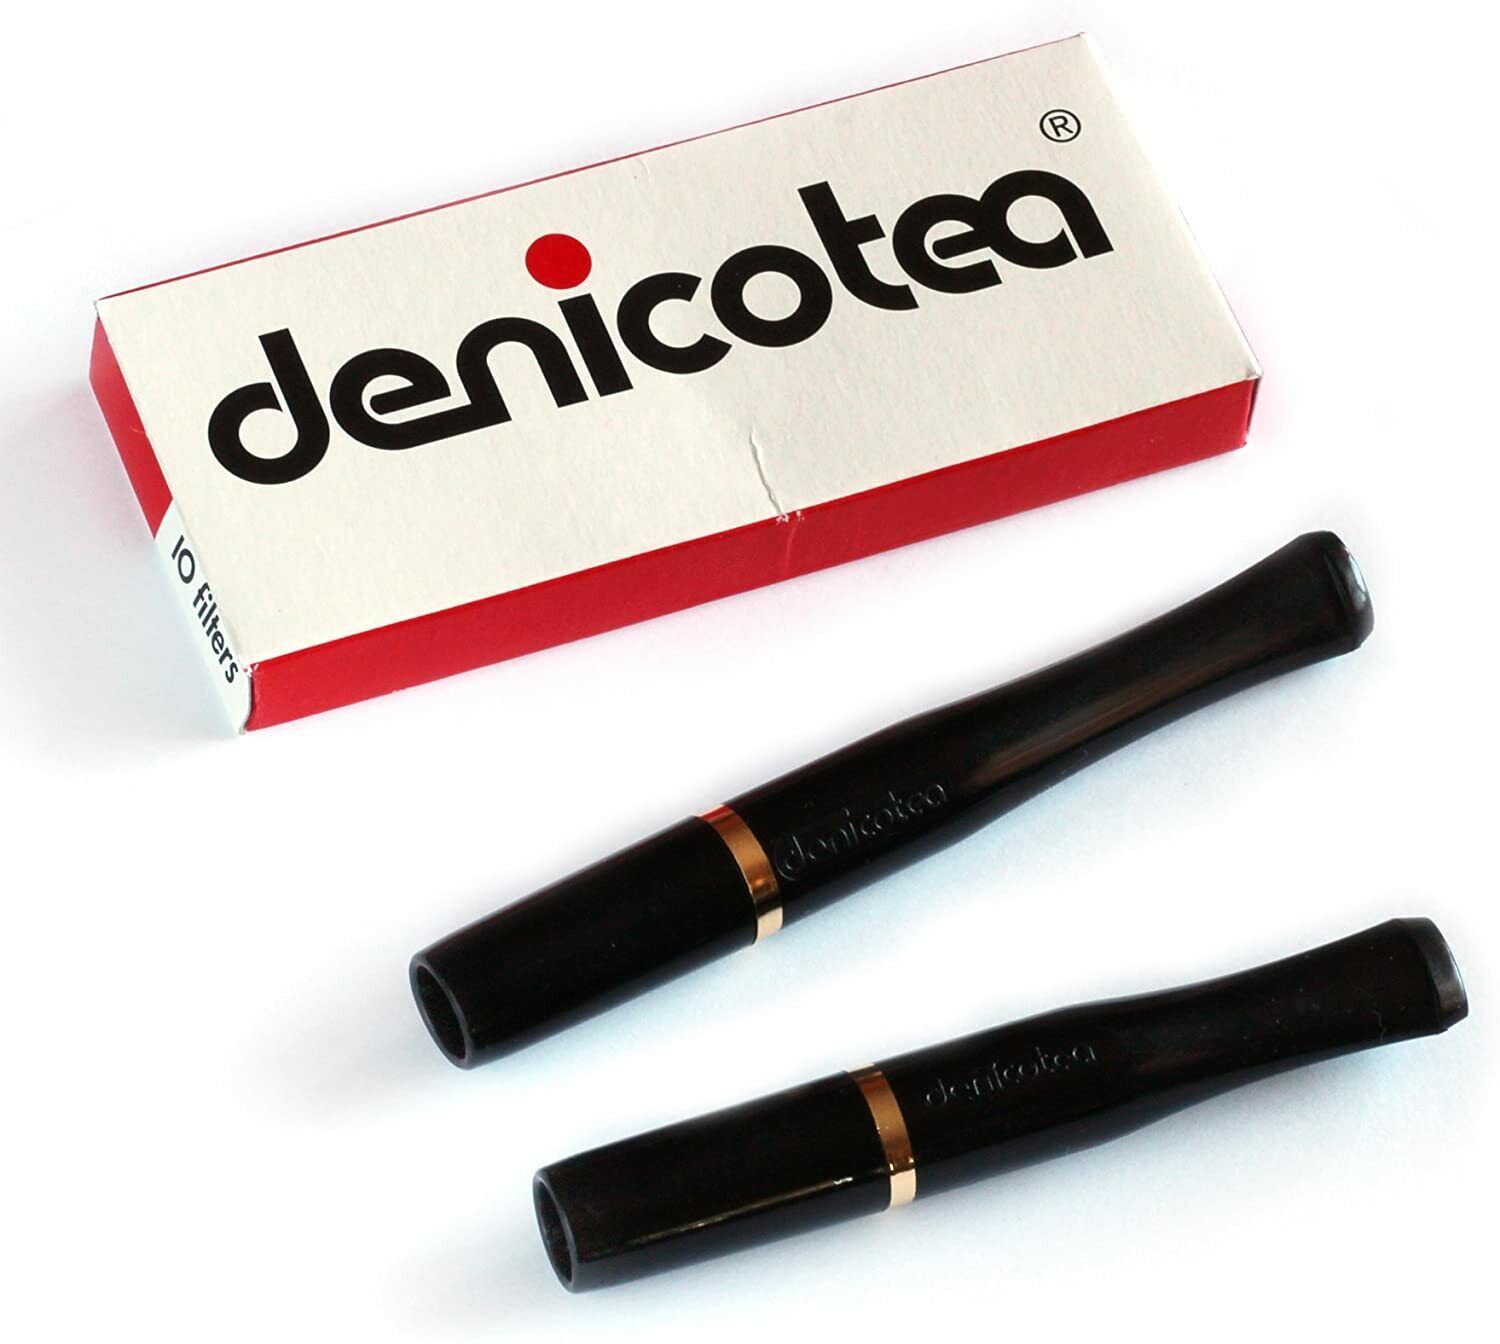 Denicotea 2 Cigarette Holder Black with Golden Colored Ring + 10 Extra Filters